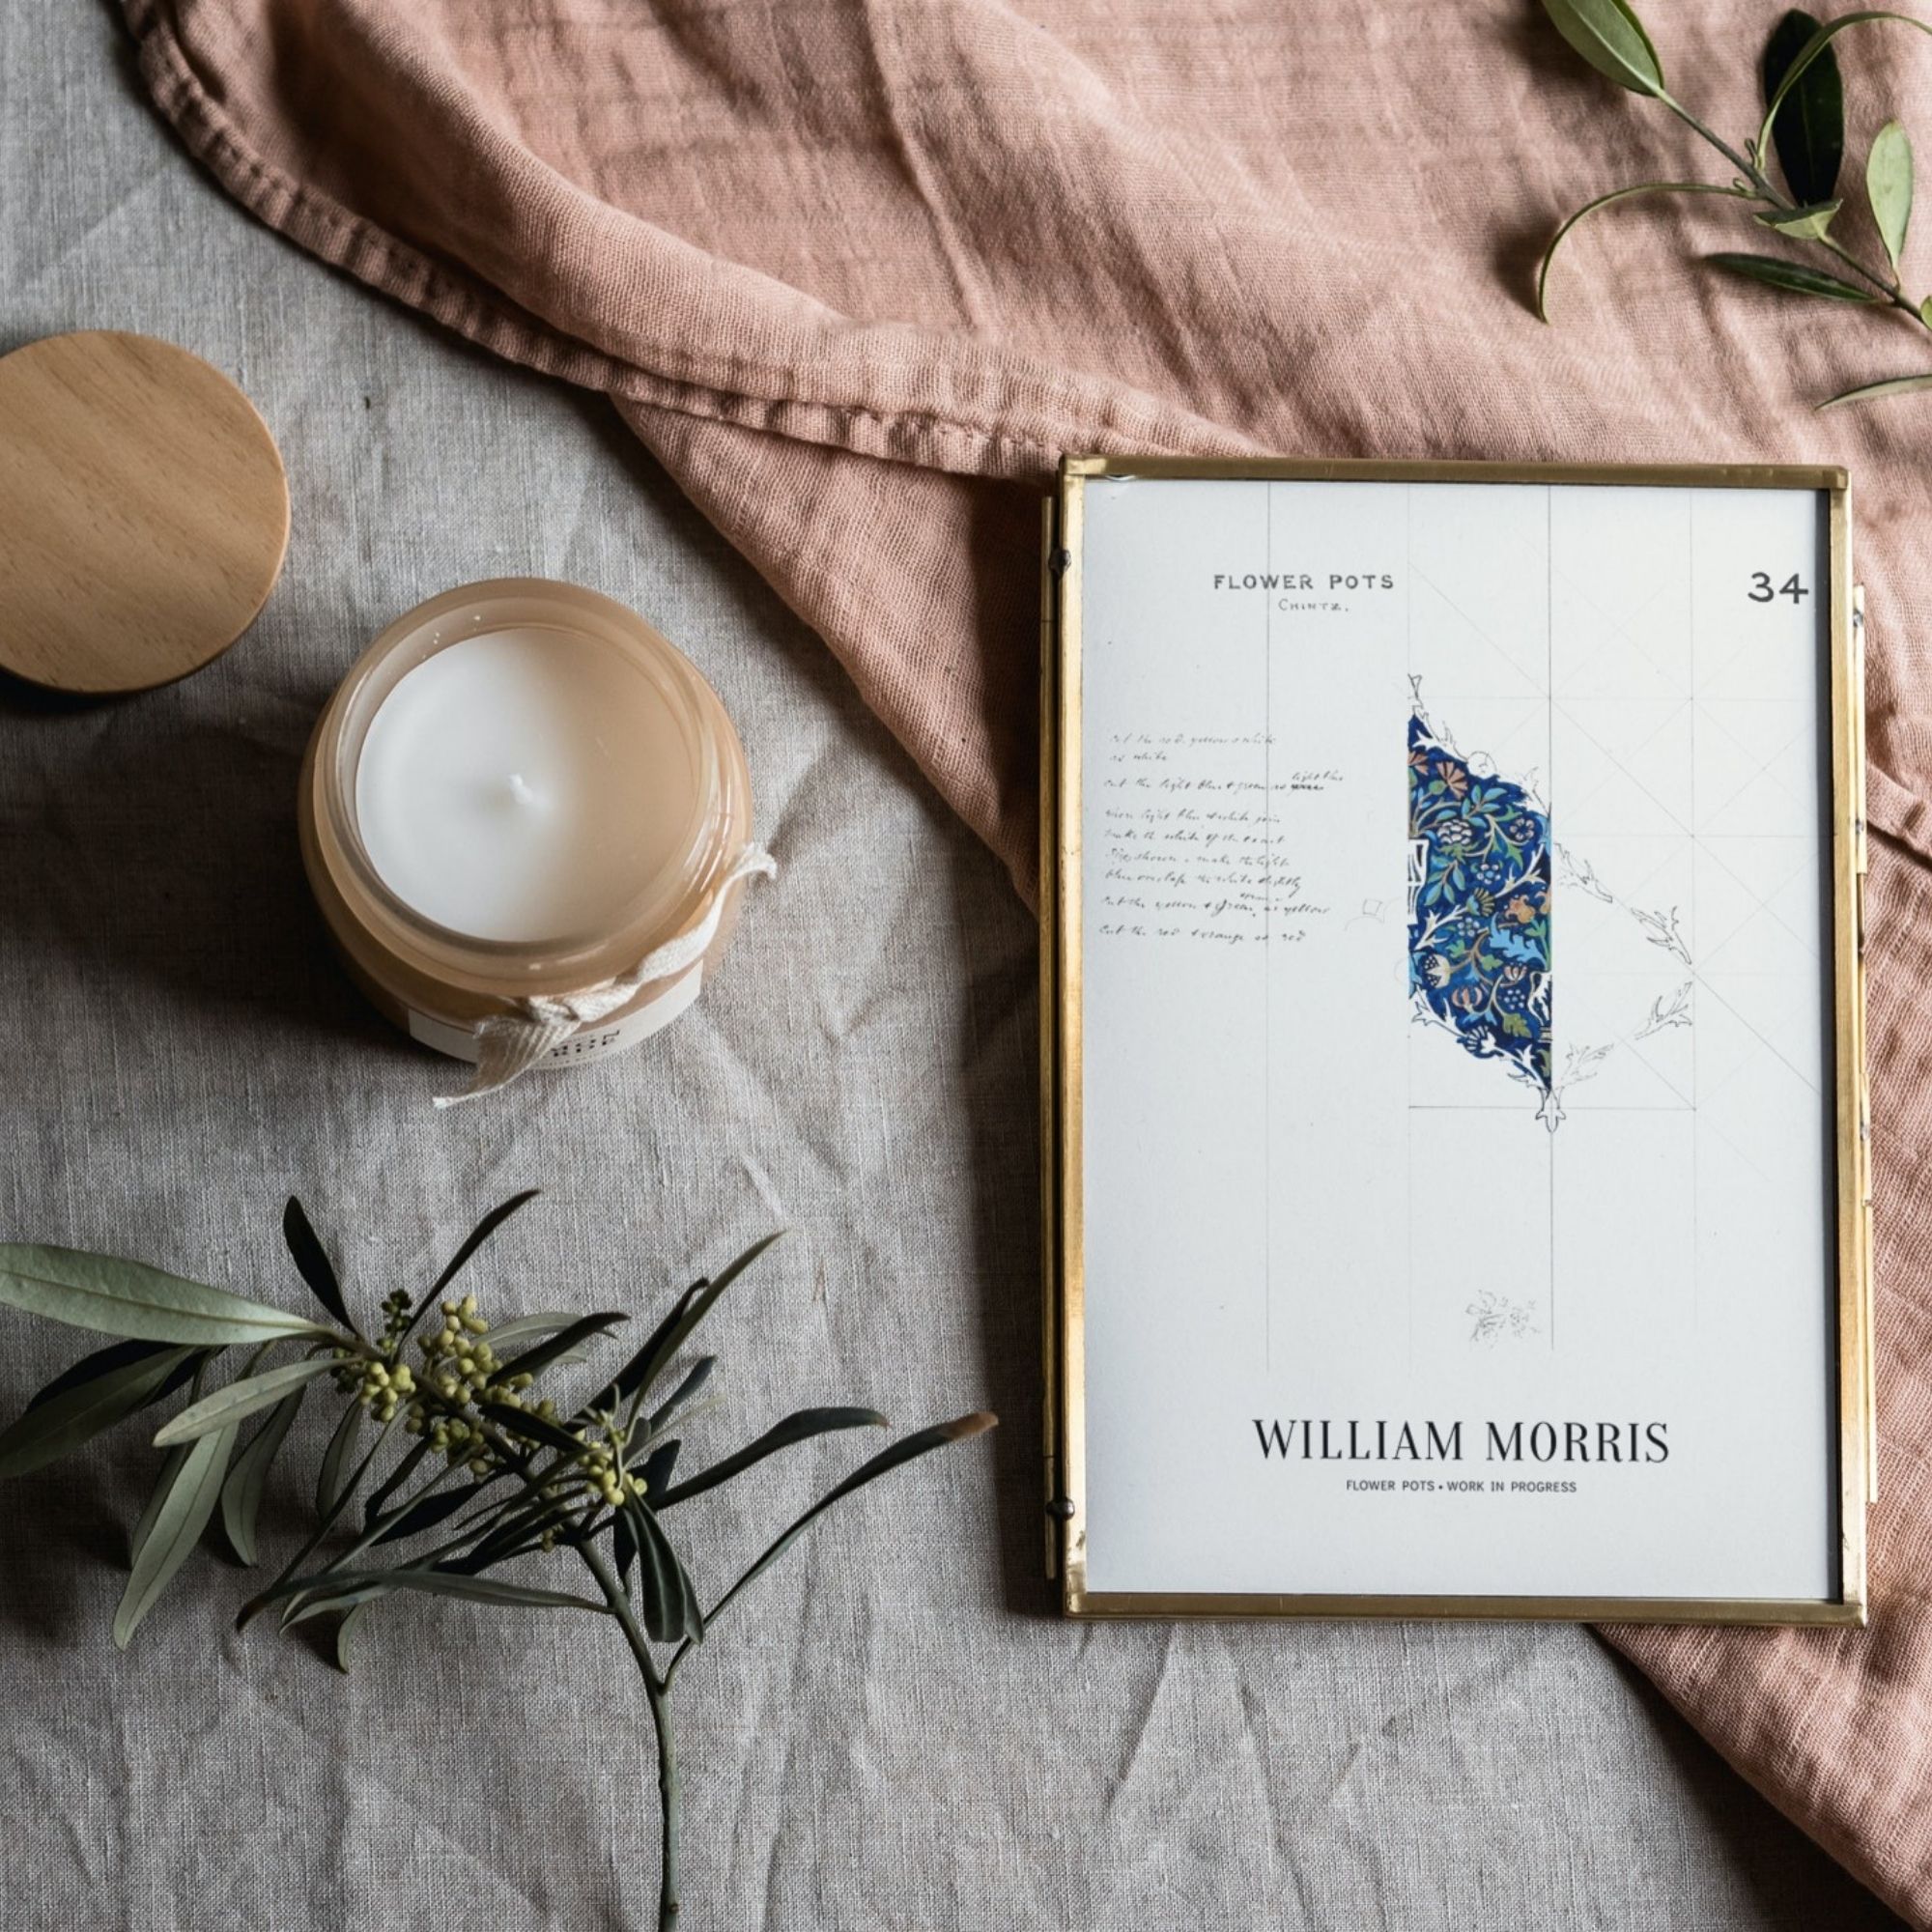 Iconic William Morris 'Flower Pots' poster with a rich blue chintz pattern, epitomizing the celebrated vintage botanical design from the Arts and Crafts movement, ideal for artistic home decor.